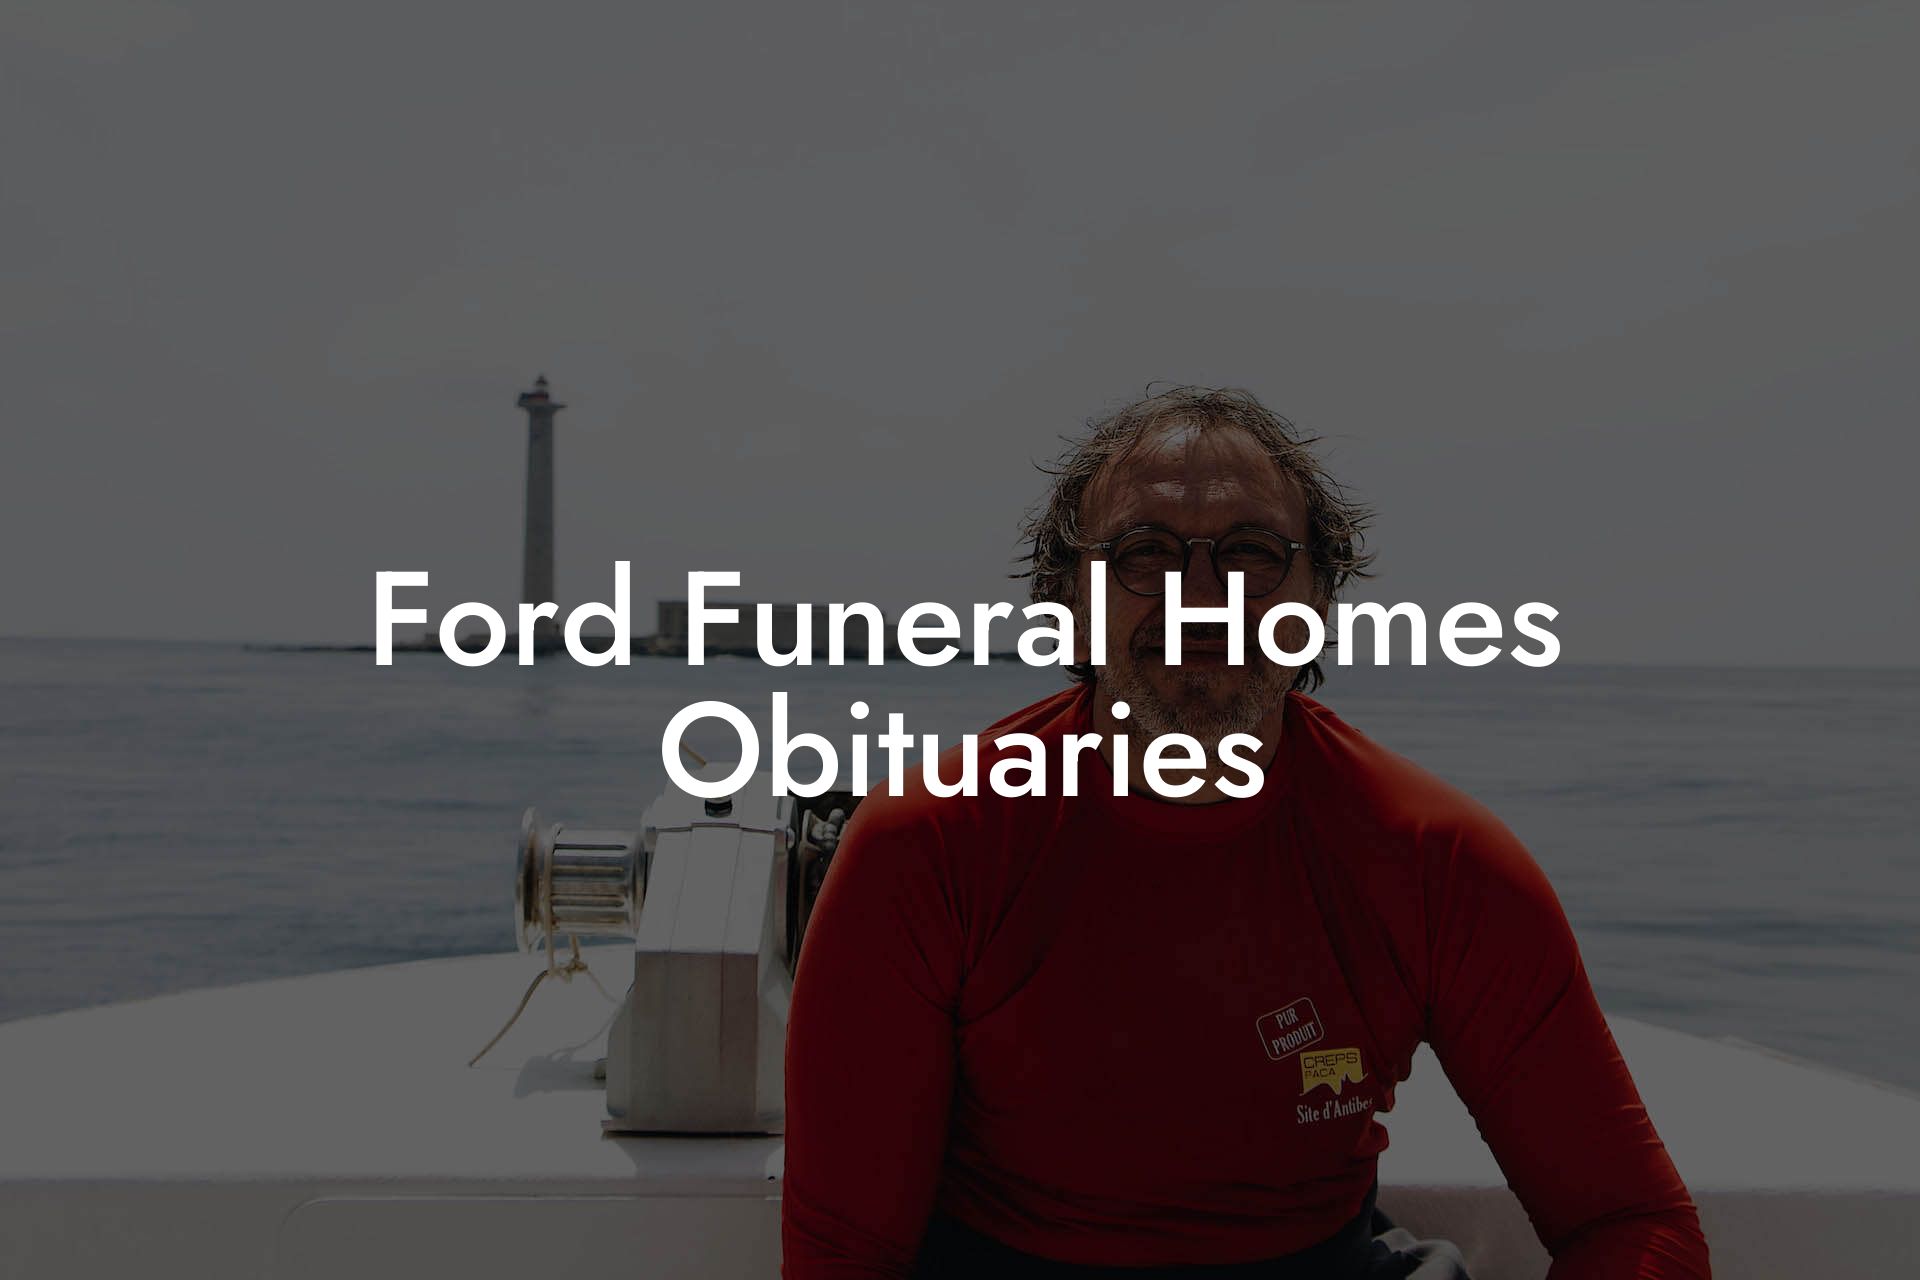 Ford Funeral Homes Obituaries